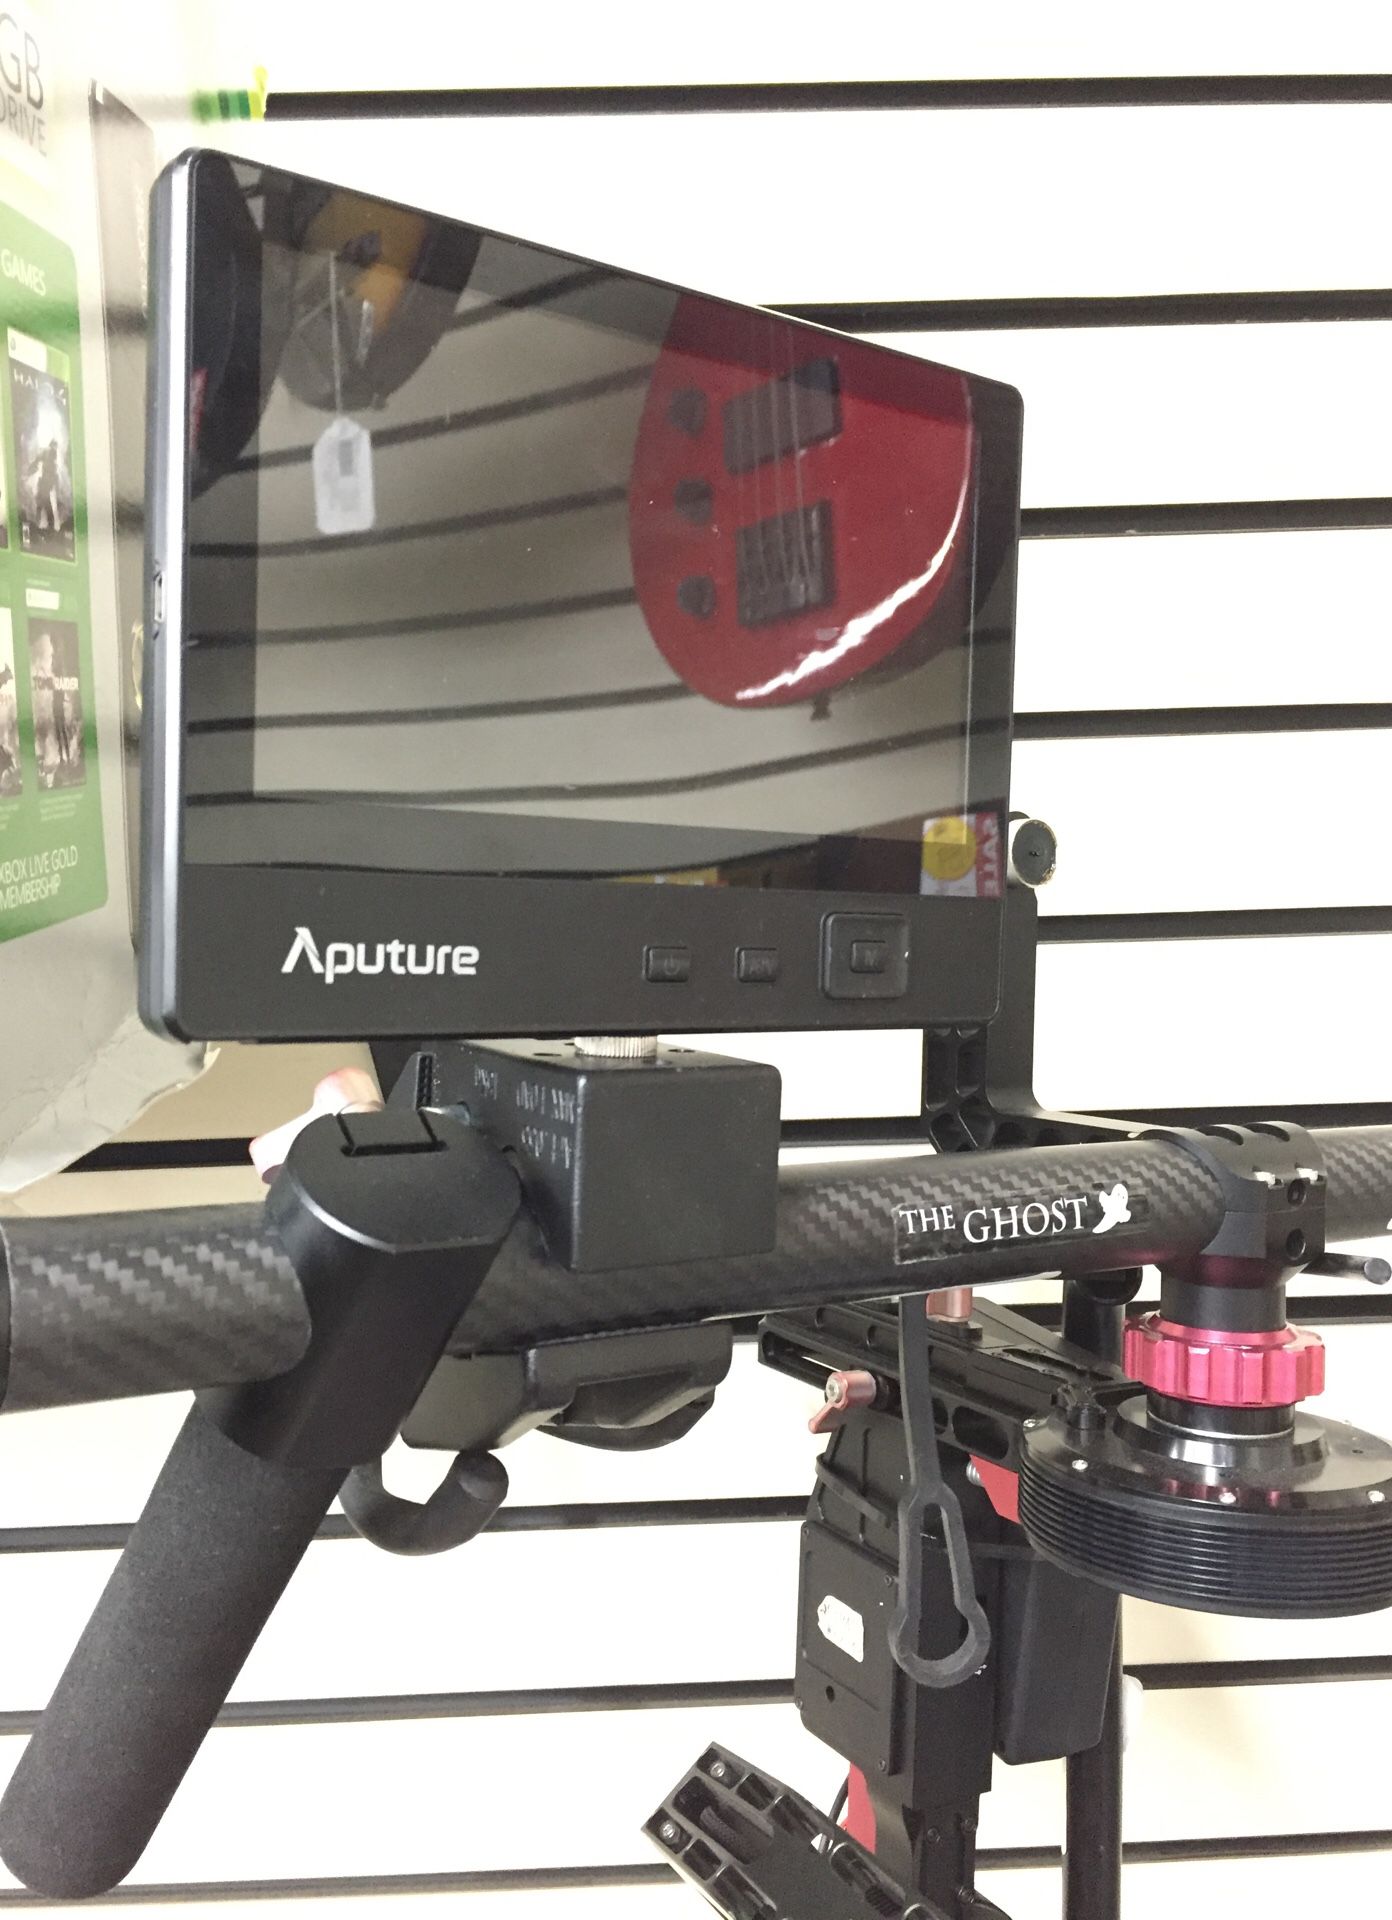 The Ghost Pro II gimbal stabilizer with Aputure display